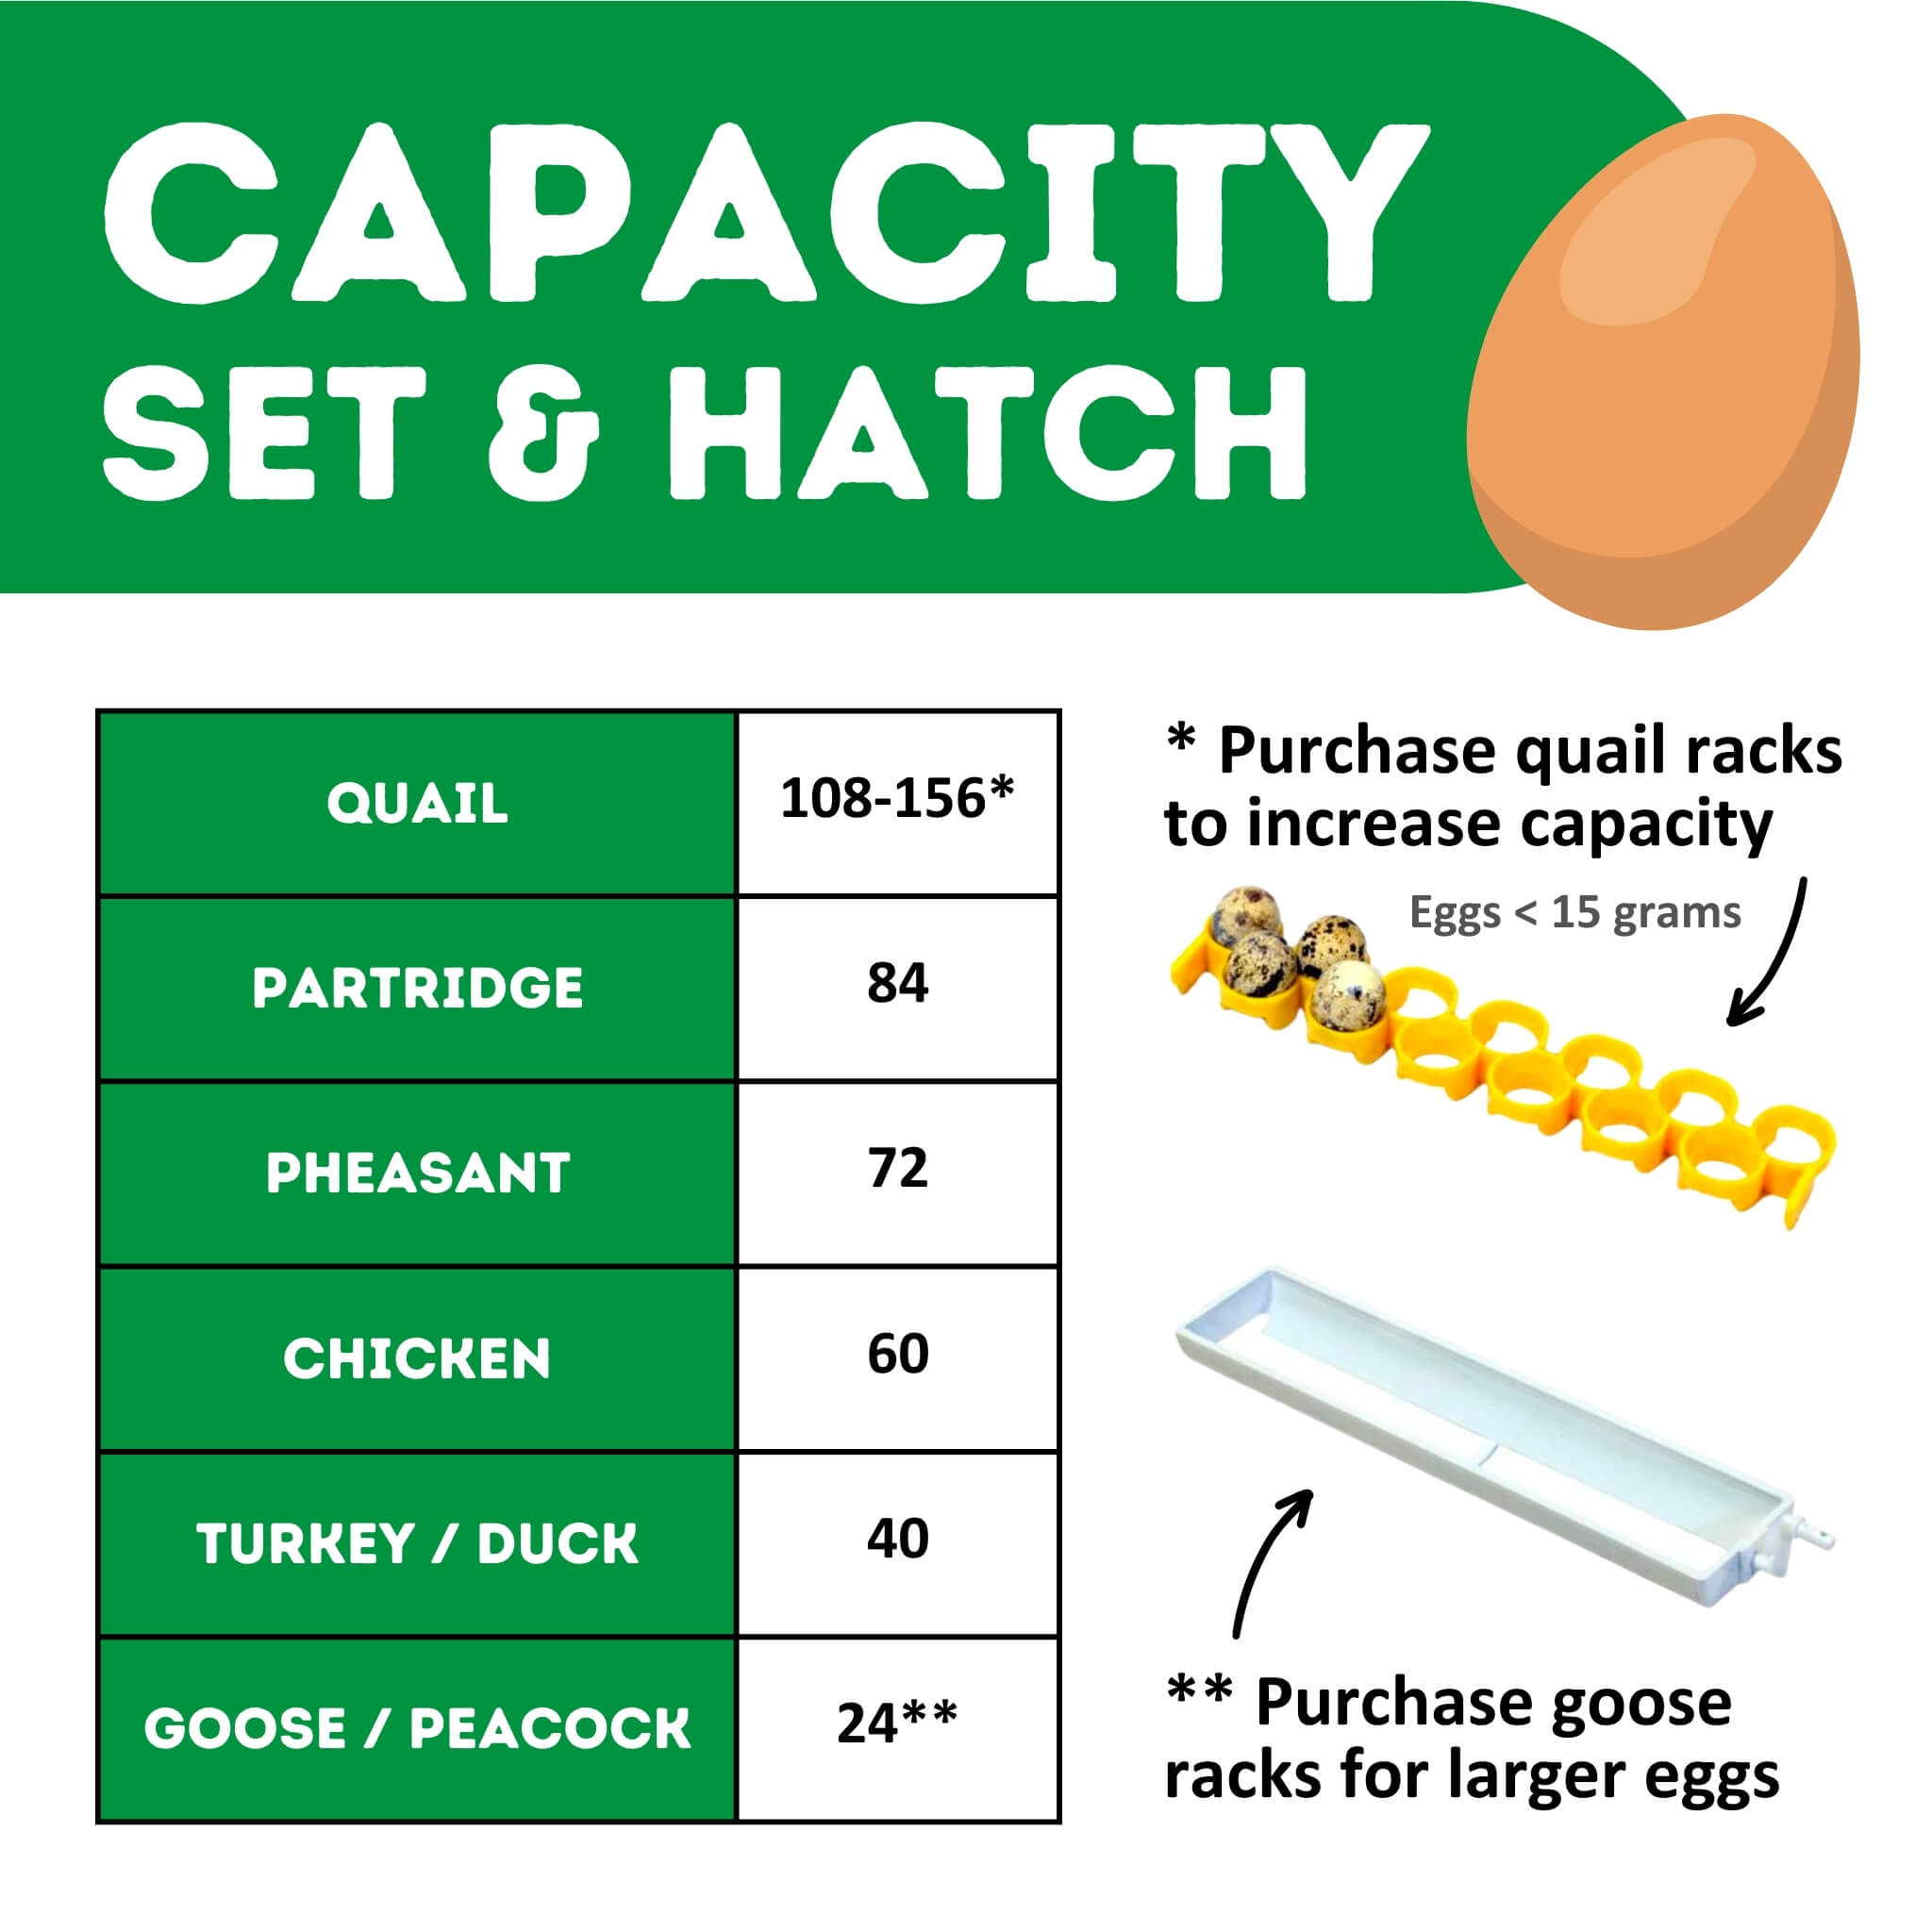 Discover the capacity of Cimuka CT60Sh for hatching quail, partridge, pheasant, chicken, turkey, duck, goose, peacock